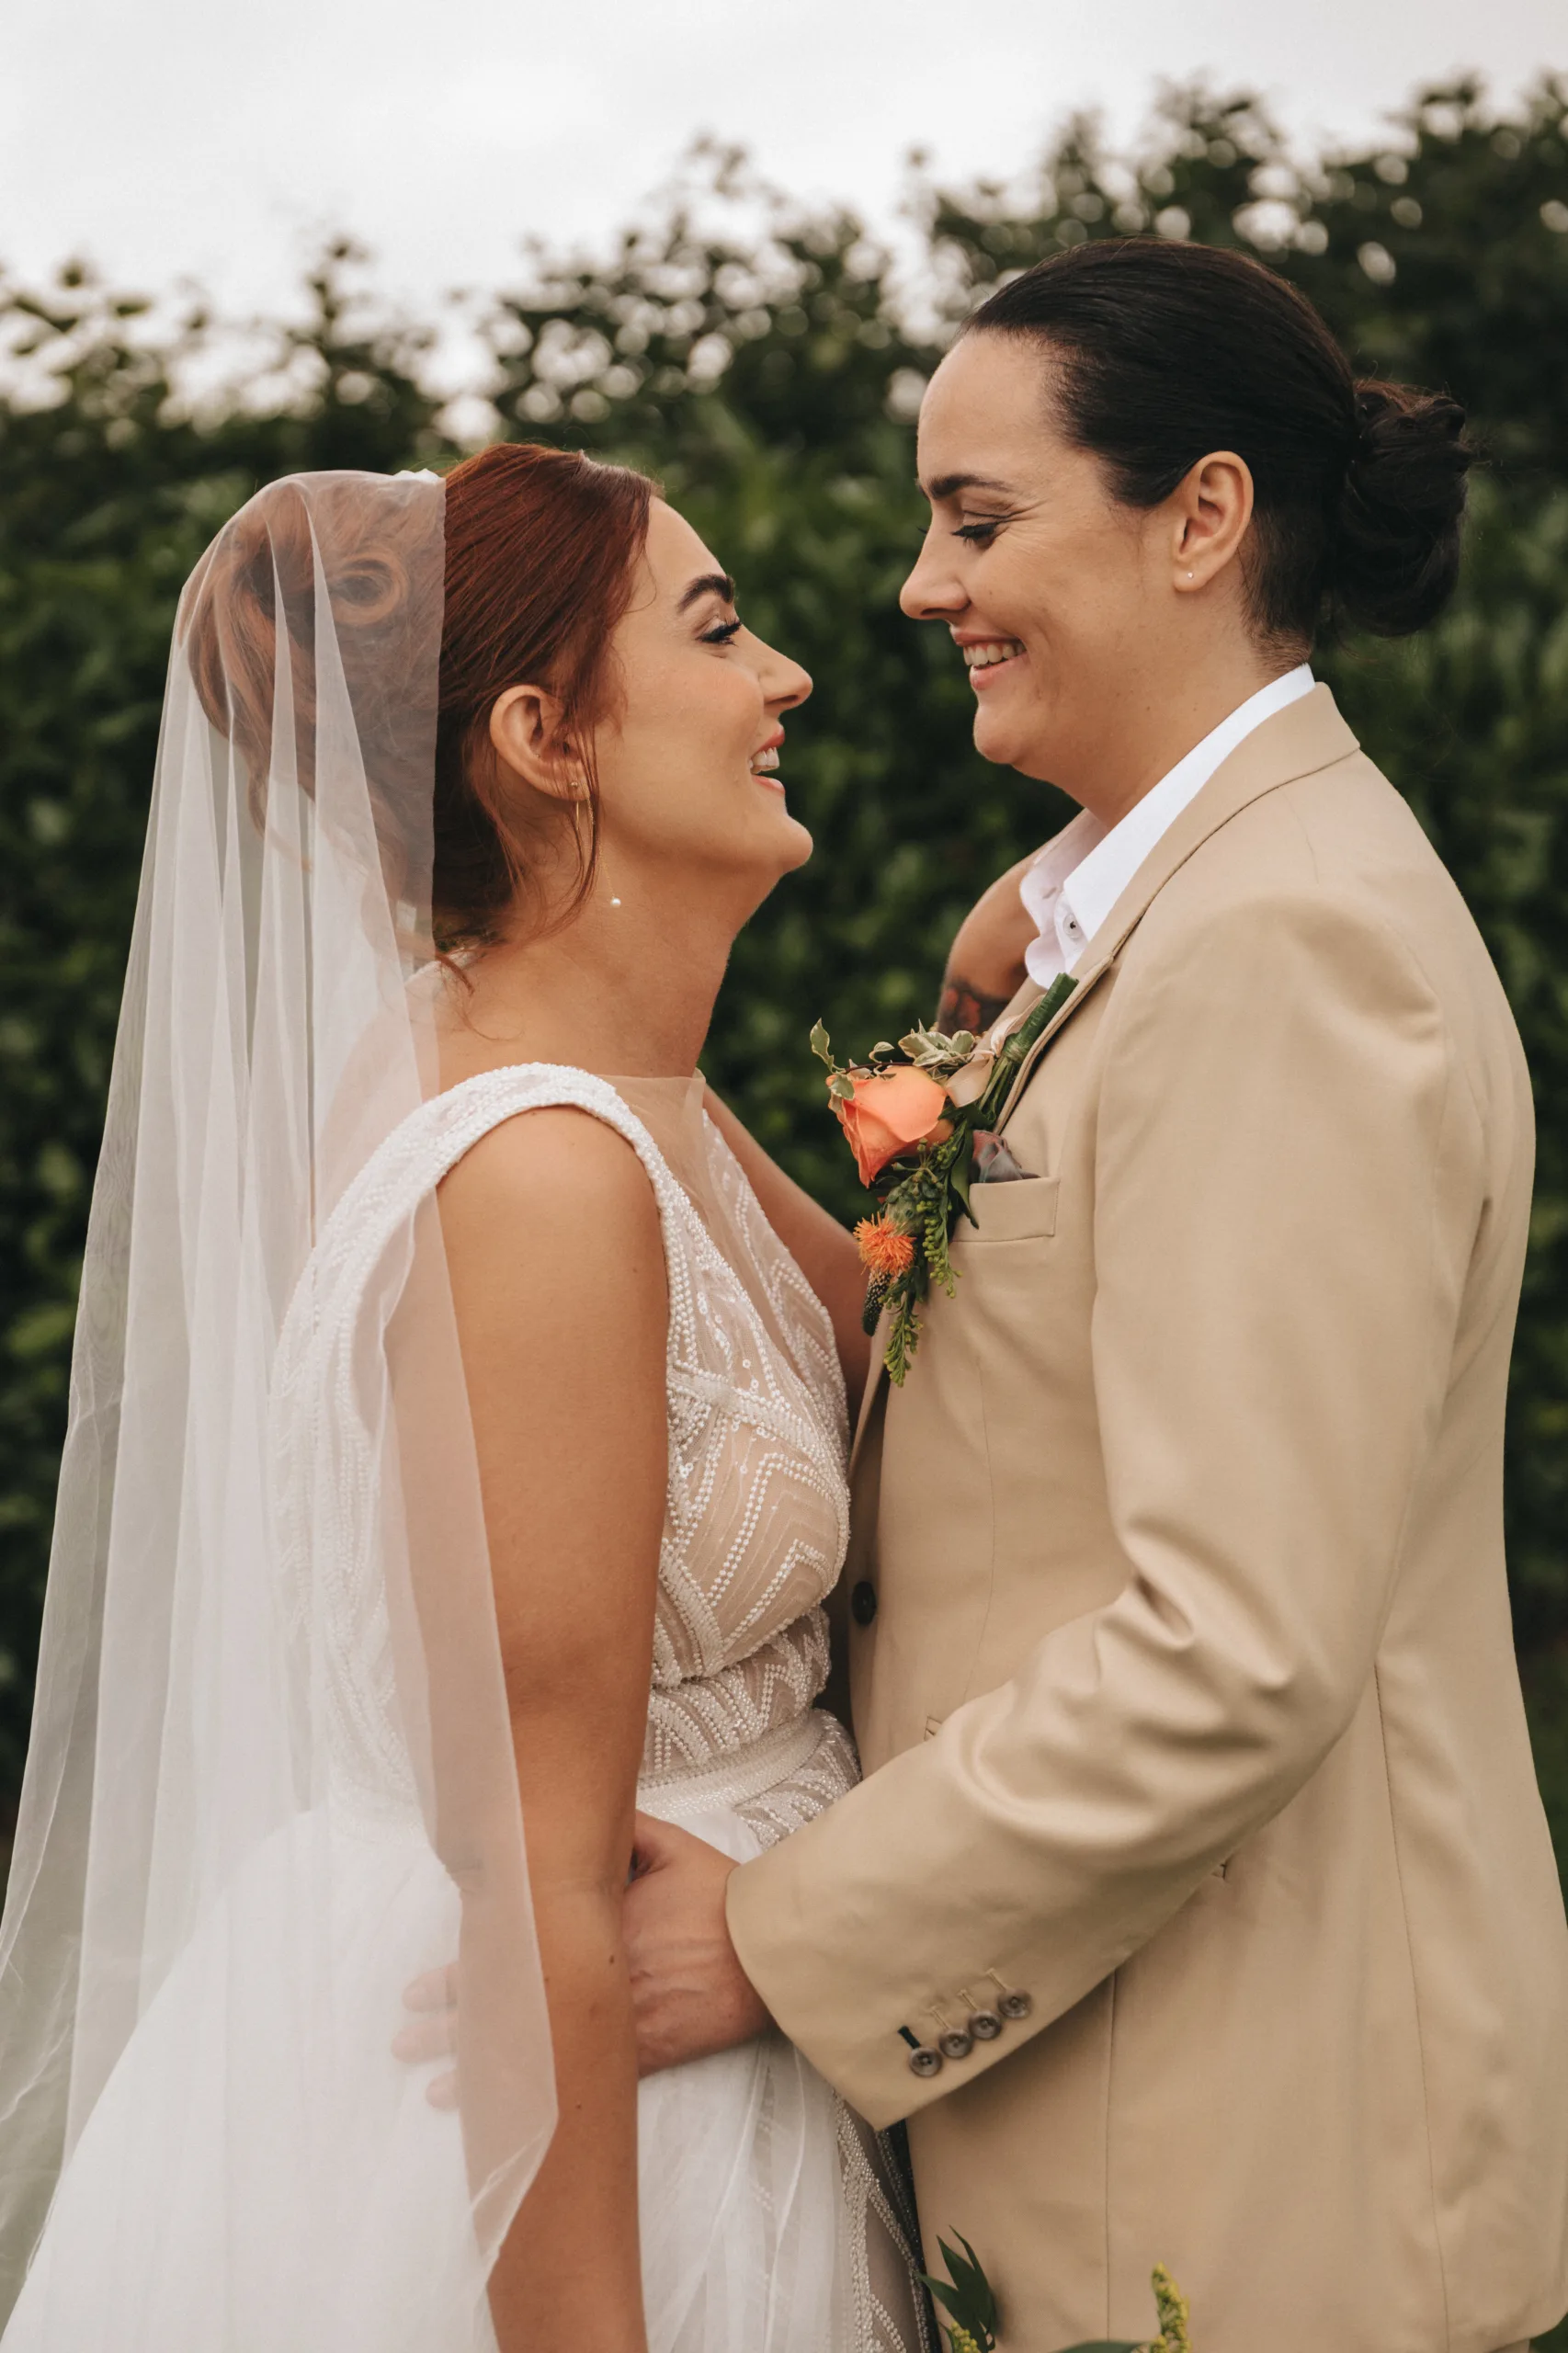 Two brides smiling at each other during a Yorkshire wedding.